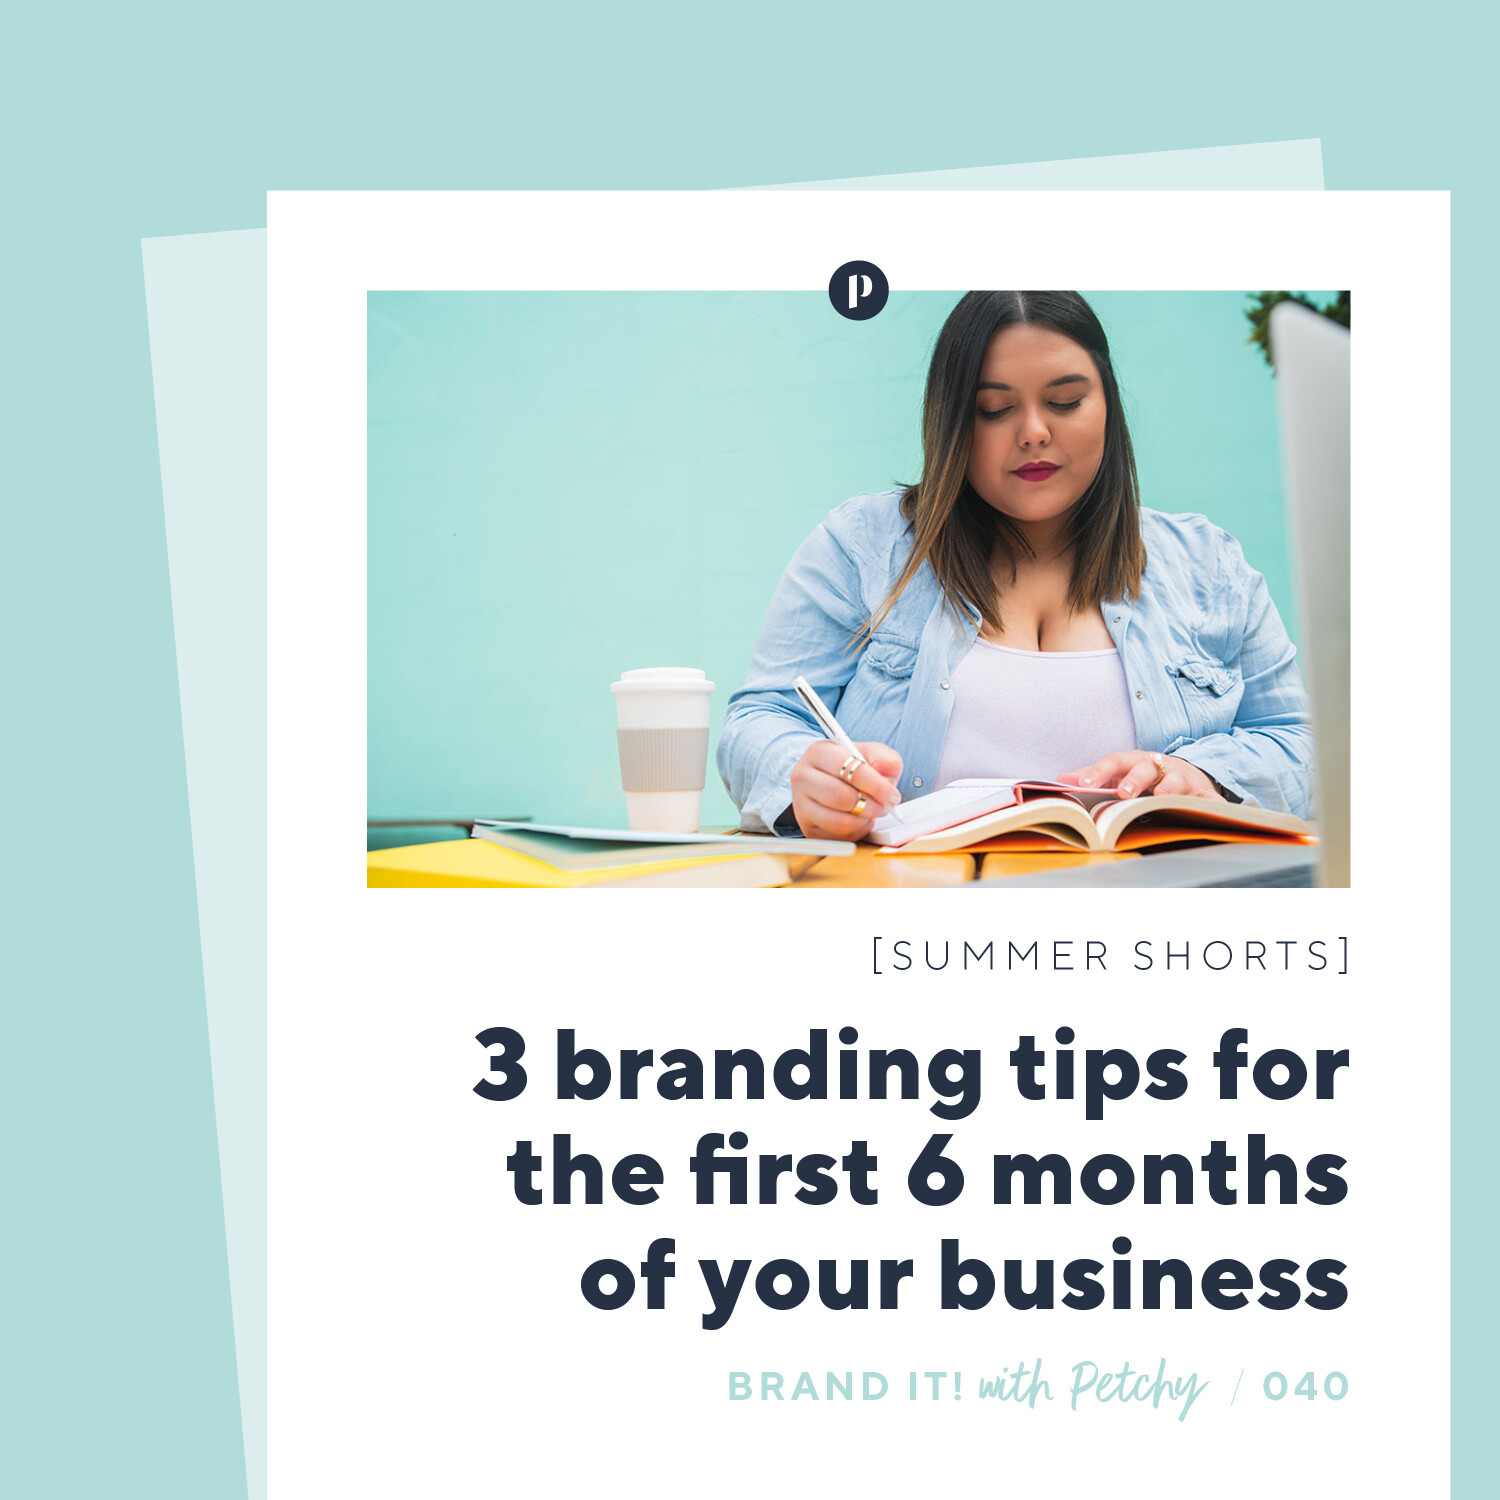 [Summer Shorts] Three branding tips for the first six months of your business